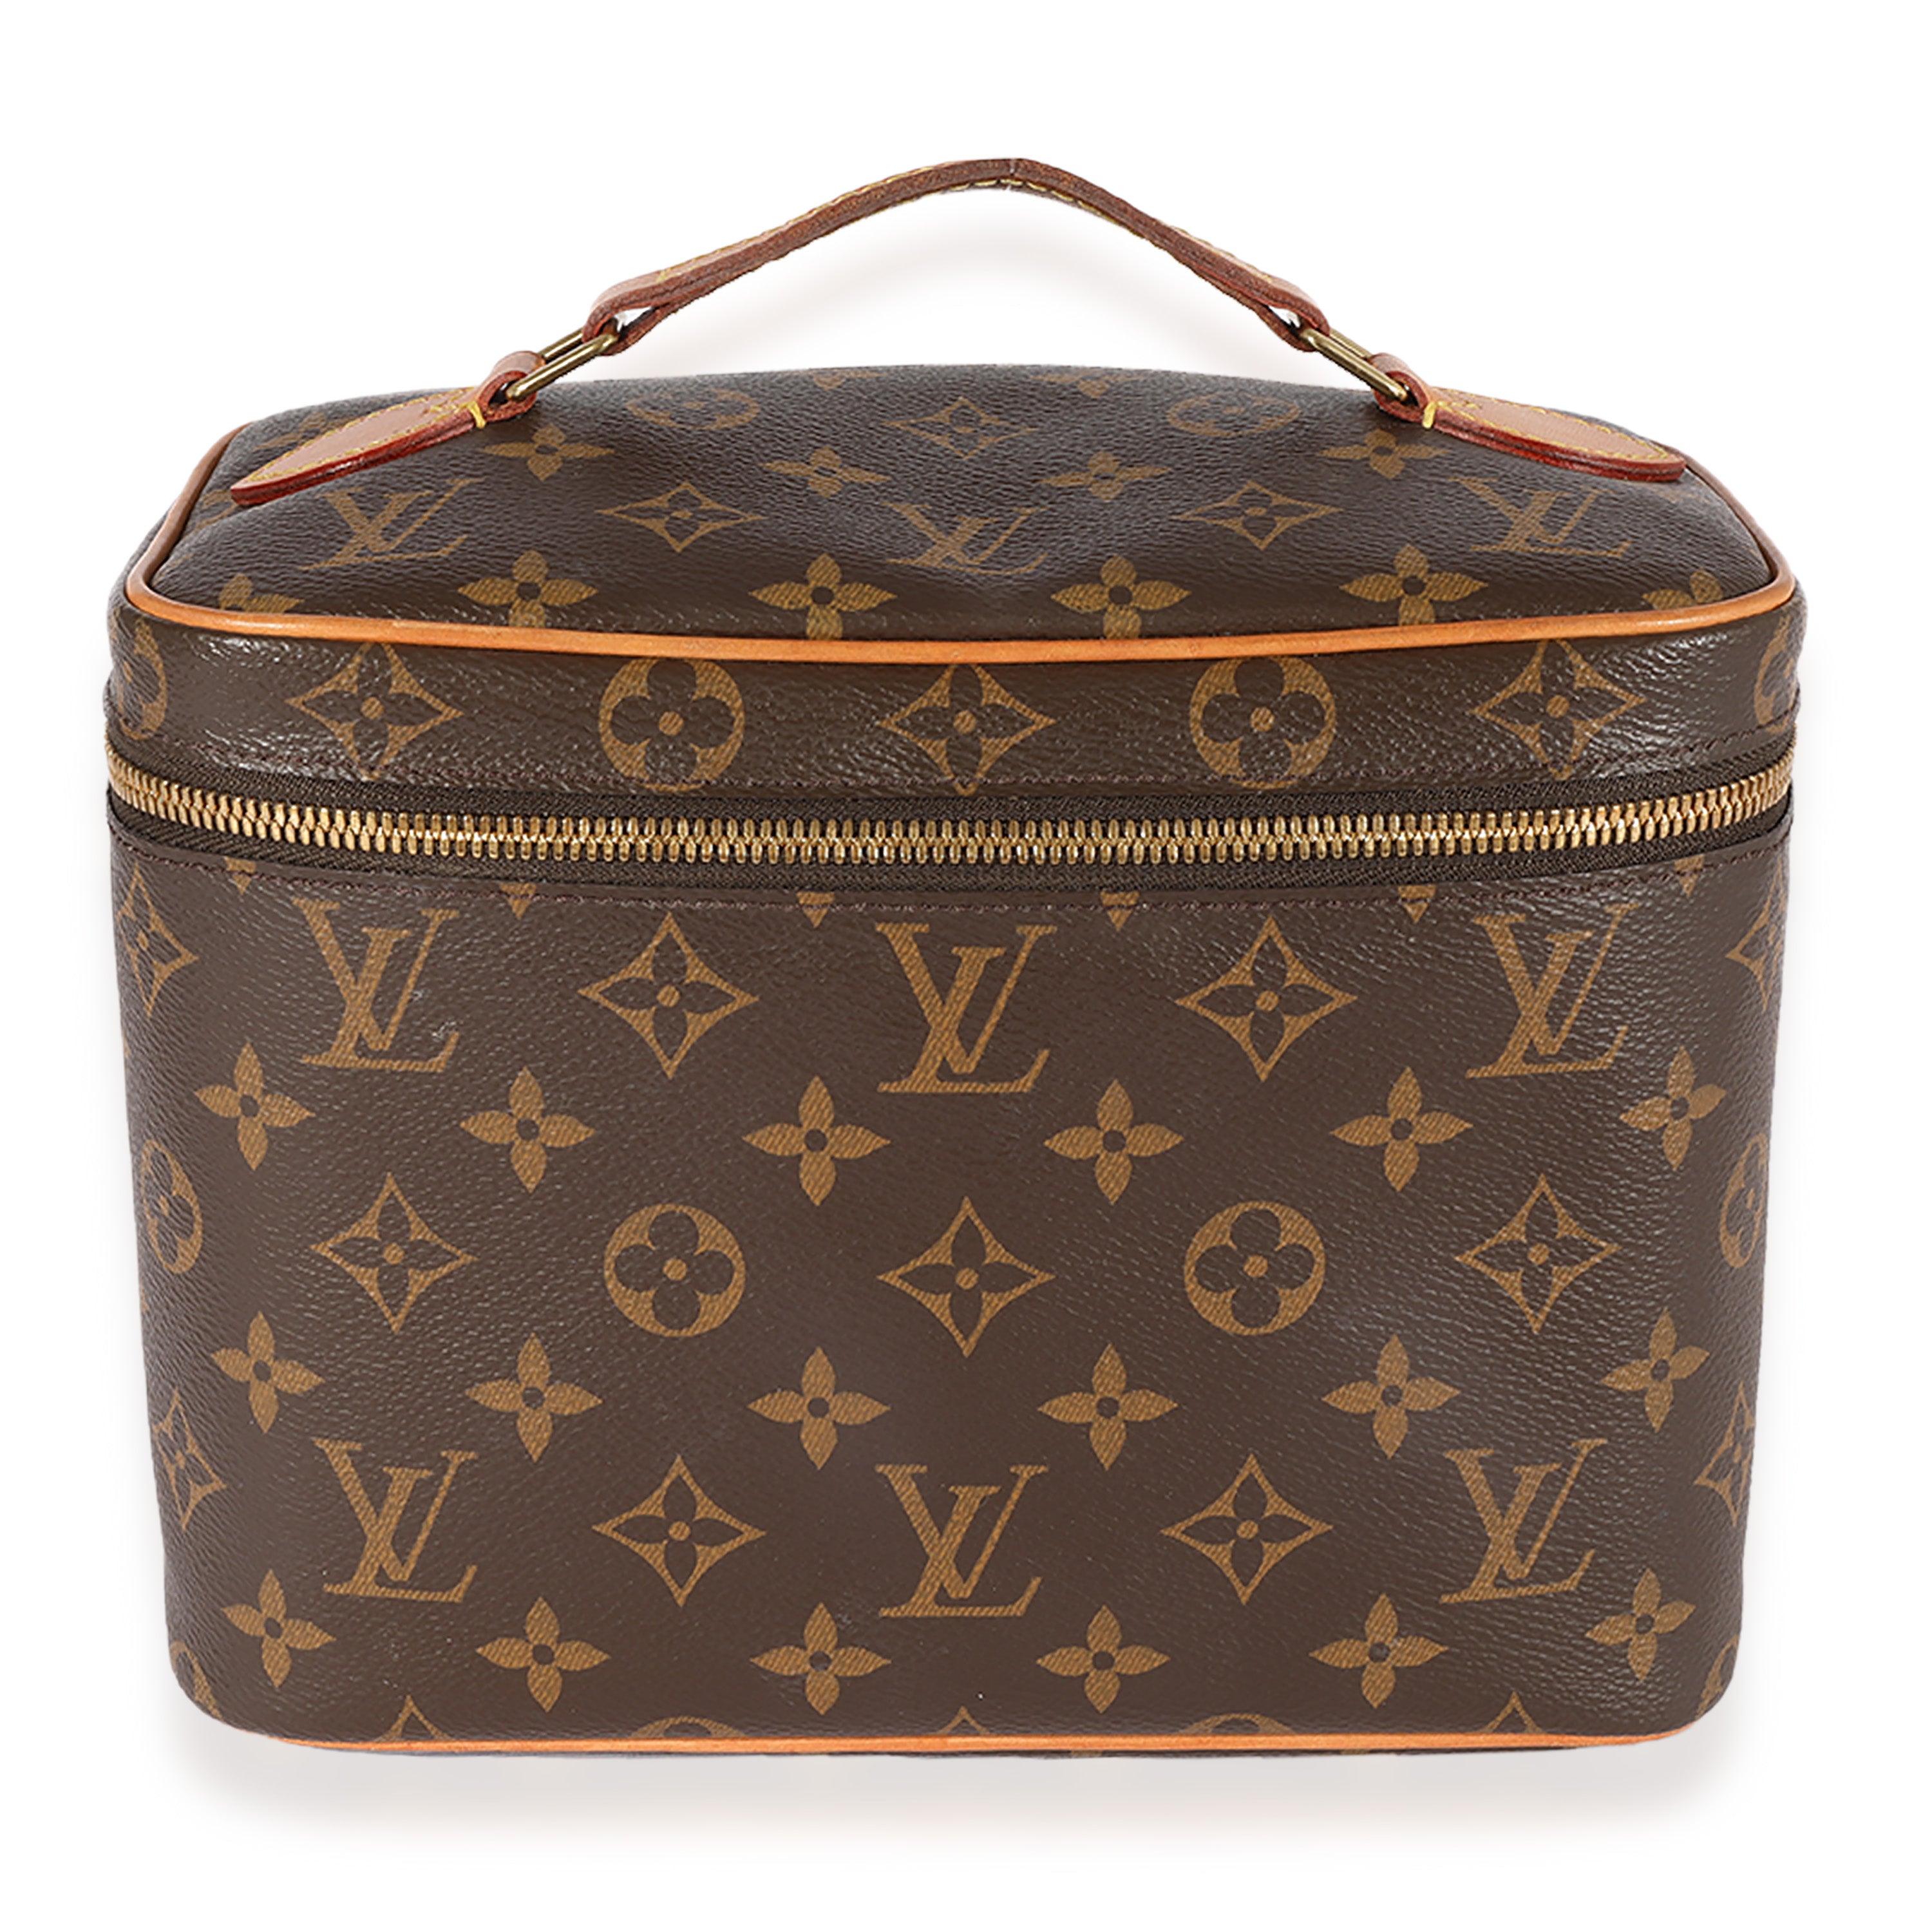 Louis Vuitton - Authenticated Vanity Handbag - Cloth Brown for Women, Good Condition